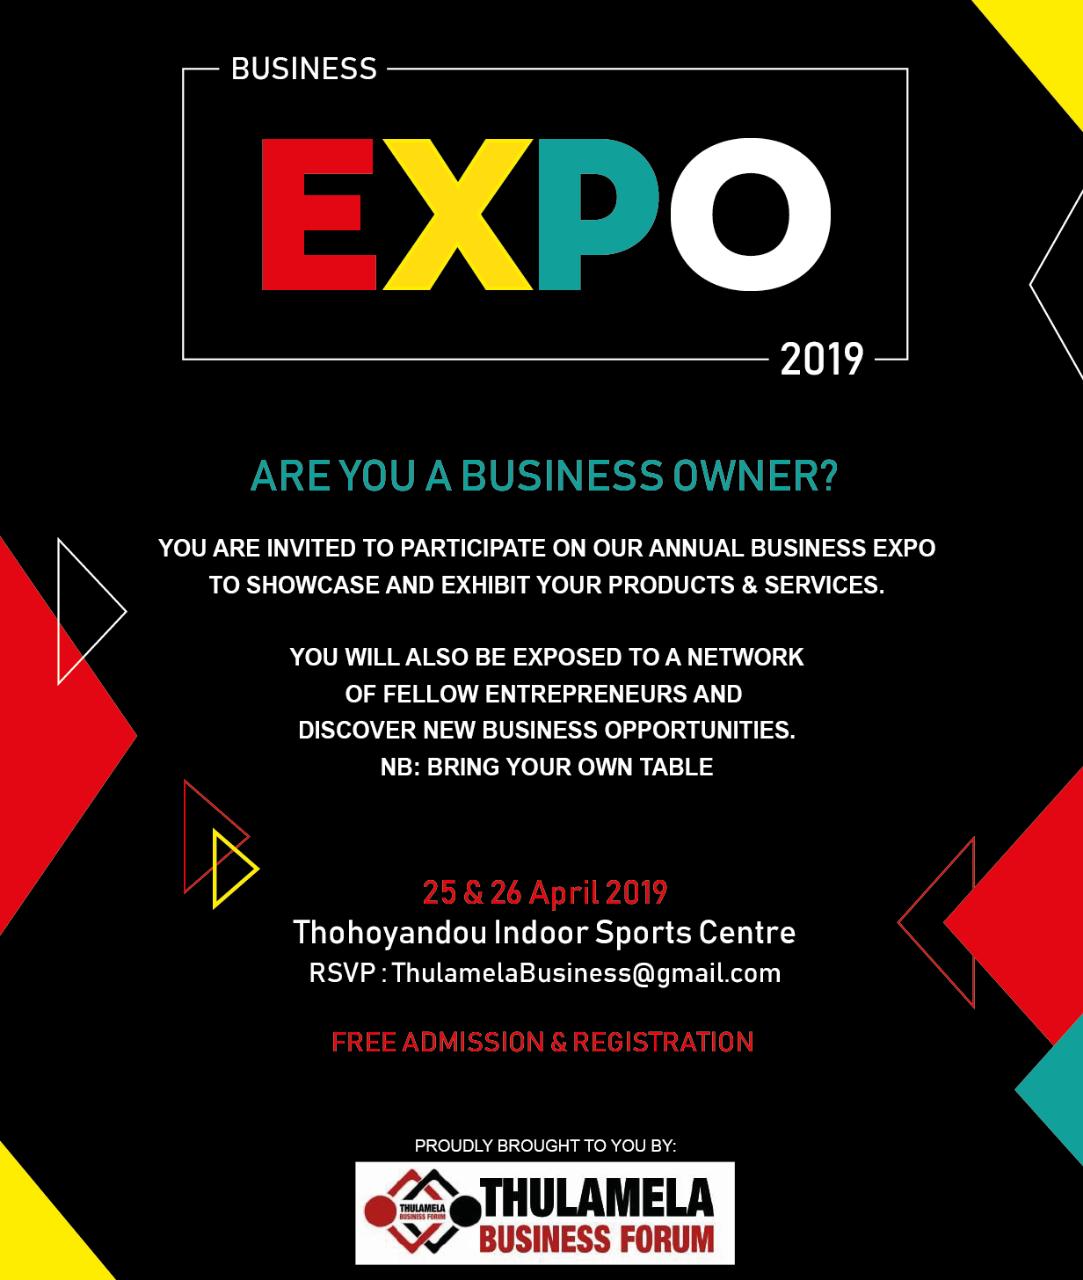 Business Expo 2019